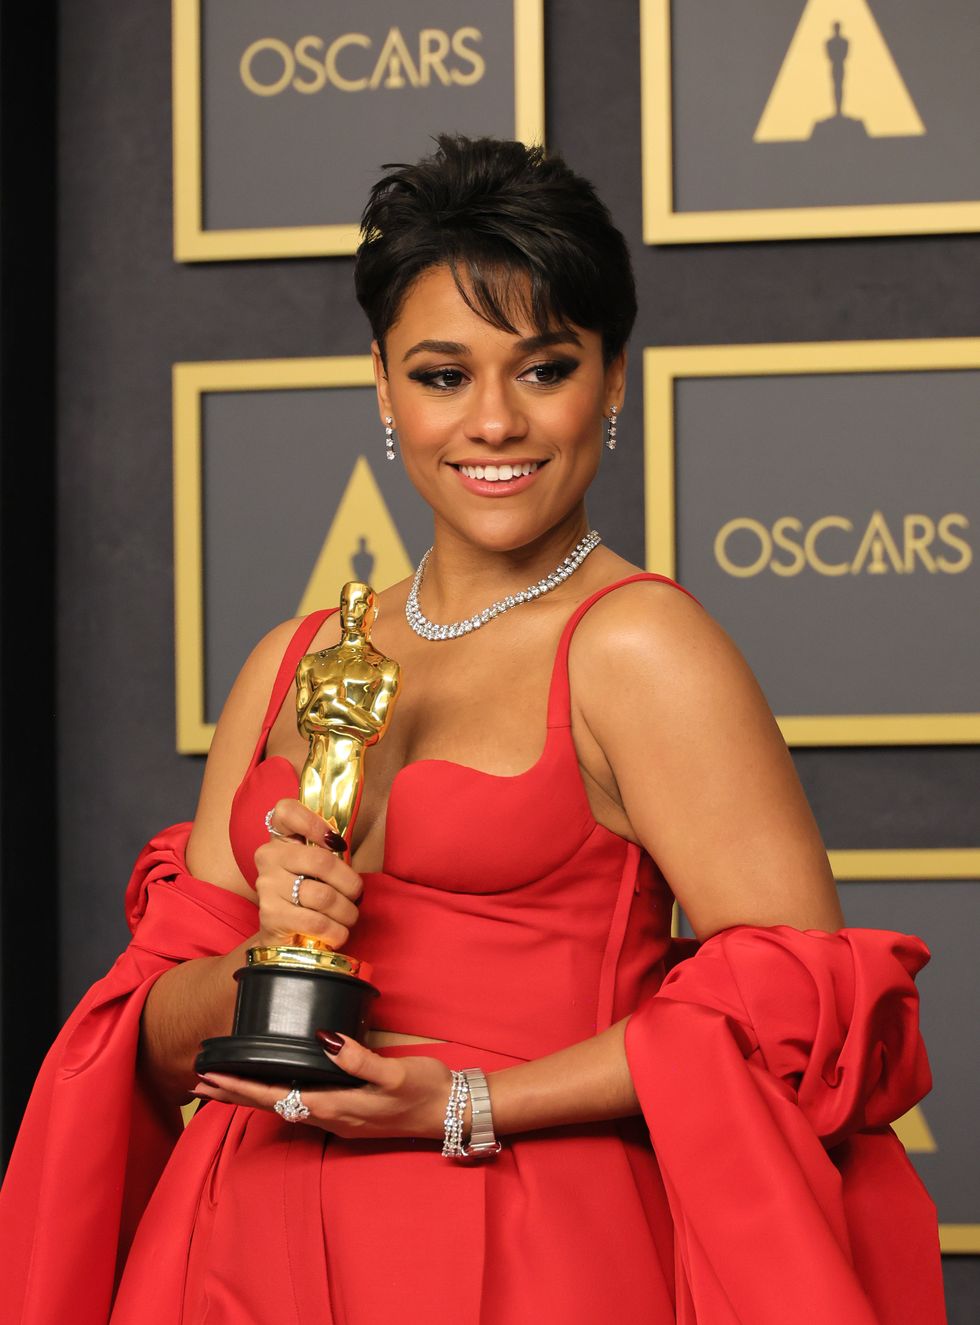 21 Best Oscars Acceptance Speeches Of All Time